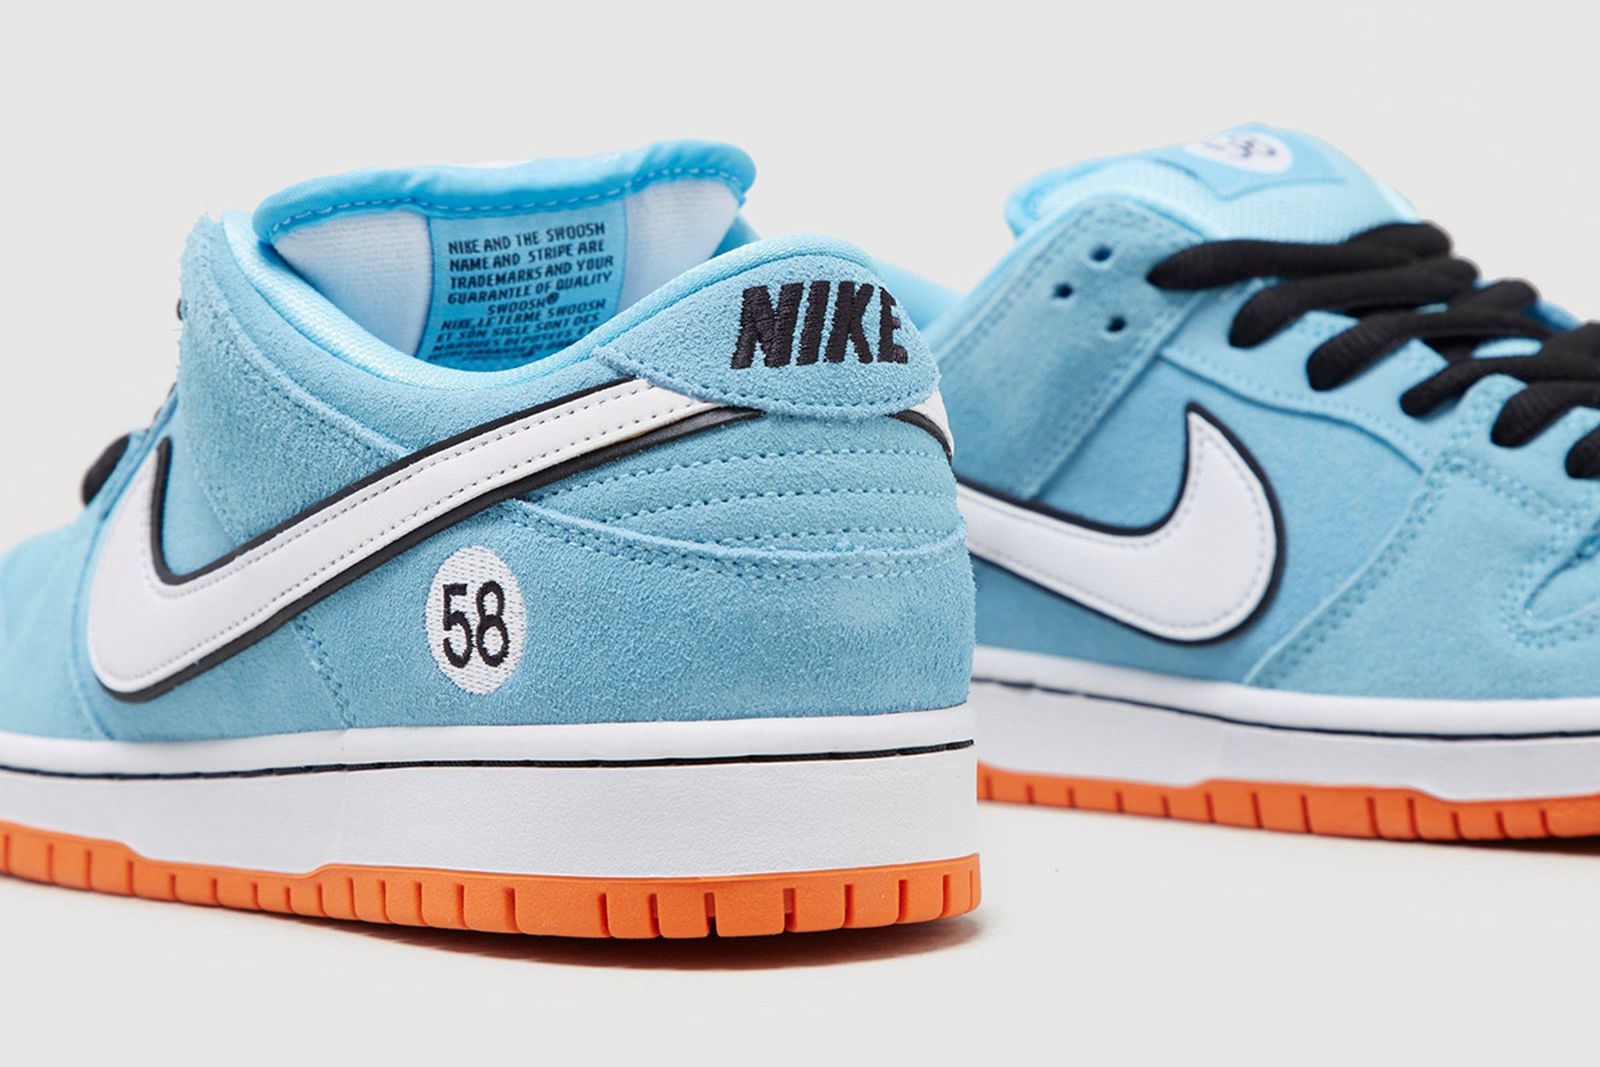 Nike blue nike skate shoes SB Dunk Low "Club 58" & Other Sneakers Worth a Peep